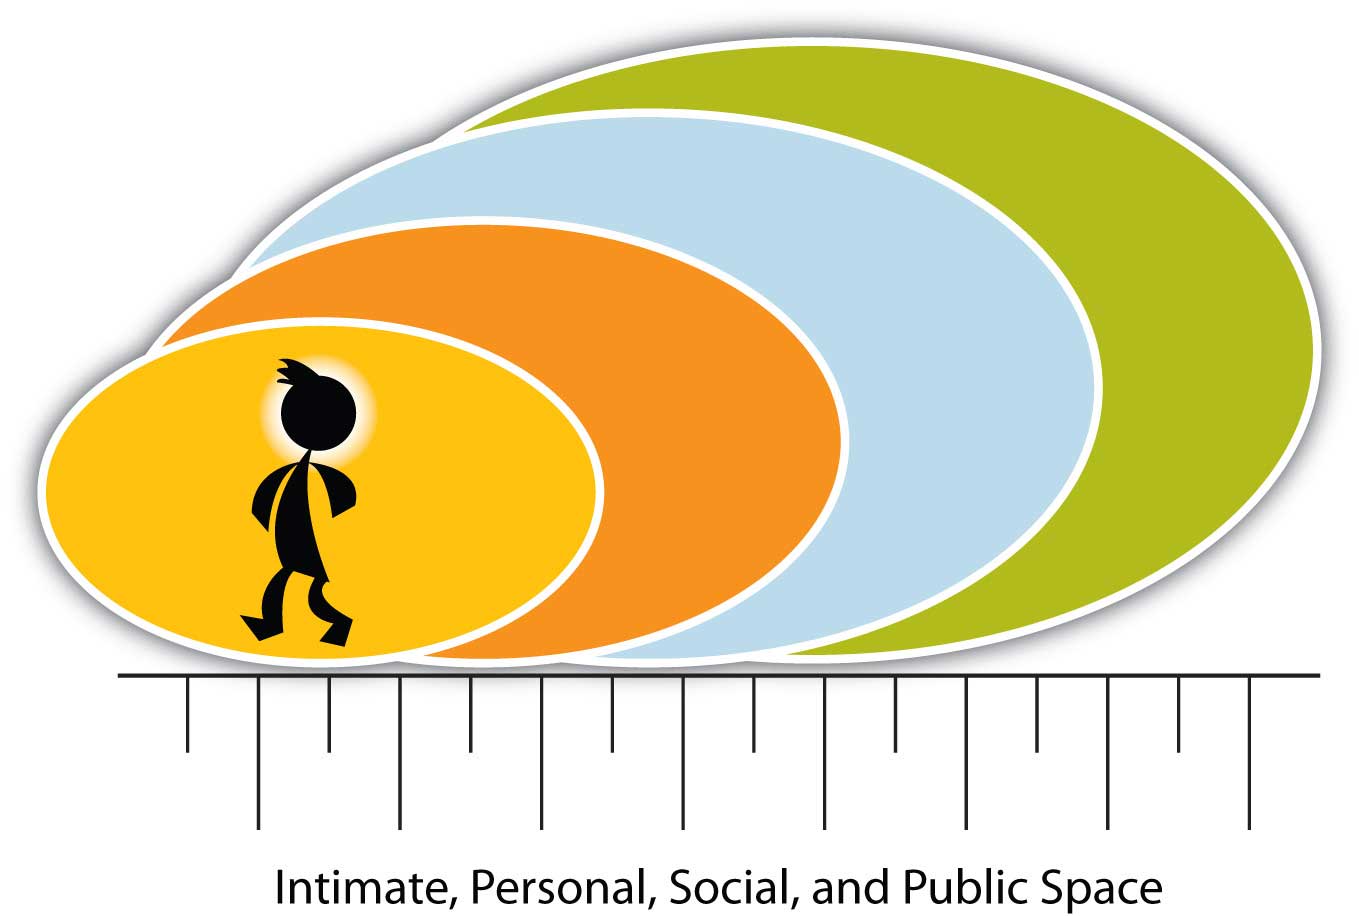 Space: Four Main Categories of Distance (Intimate, Personal, Social, and Public Space)